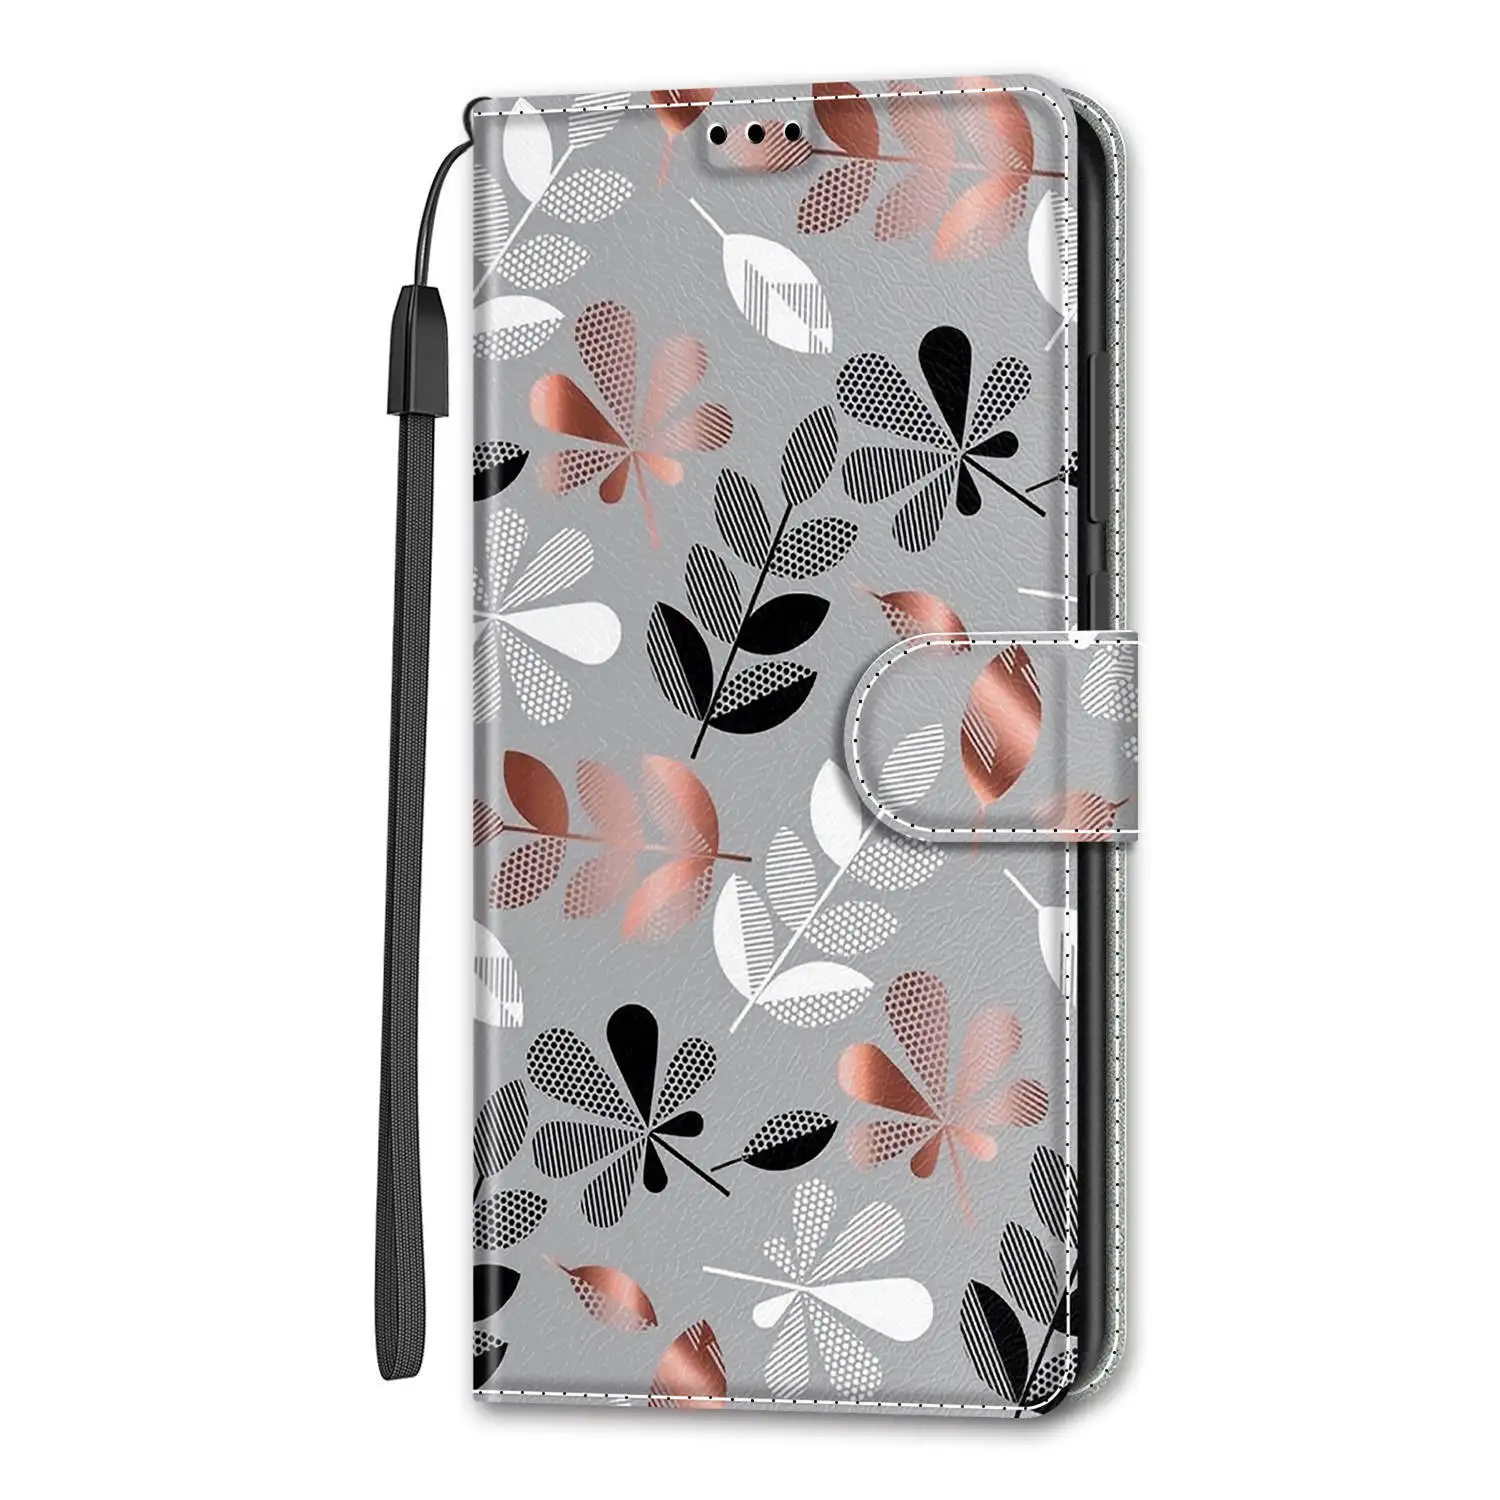 Etui Flip Leather Phone Cases For Samsung Galaxy S22 Ultra S21 Plus S20 FE S10 S9 S8 S7 Luxury Flower Pattern Wallet Cover Etui galaxy s22+ wallet case